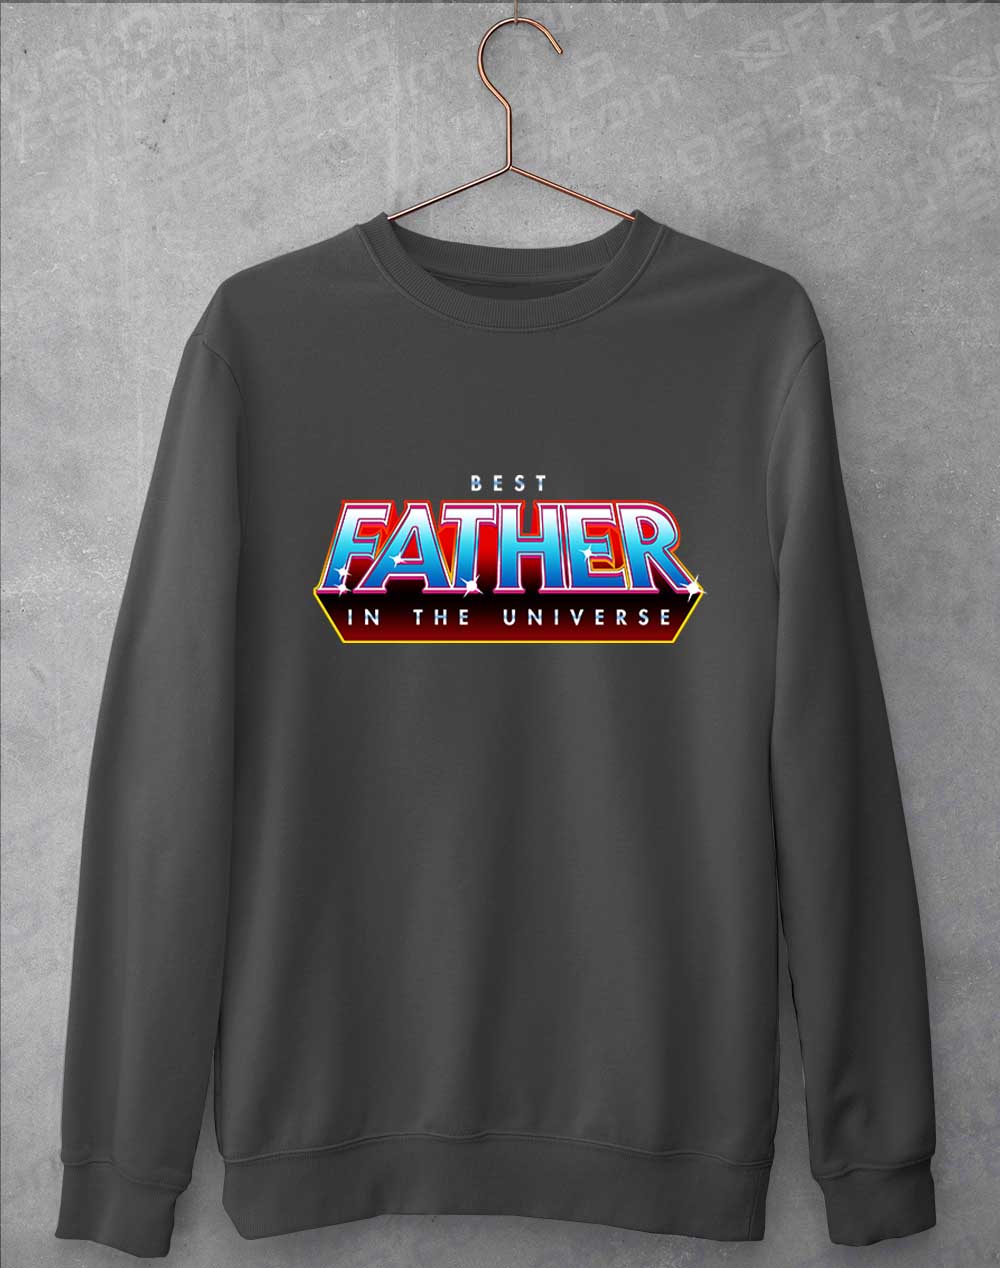 Charcoal - Best Father in the Universe Sweatshirt